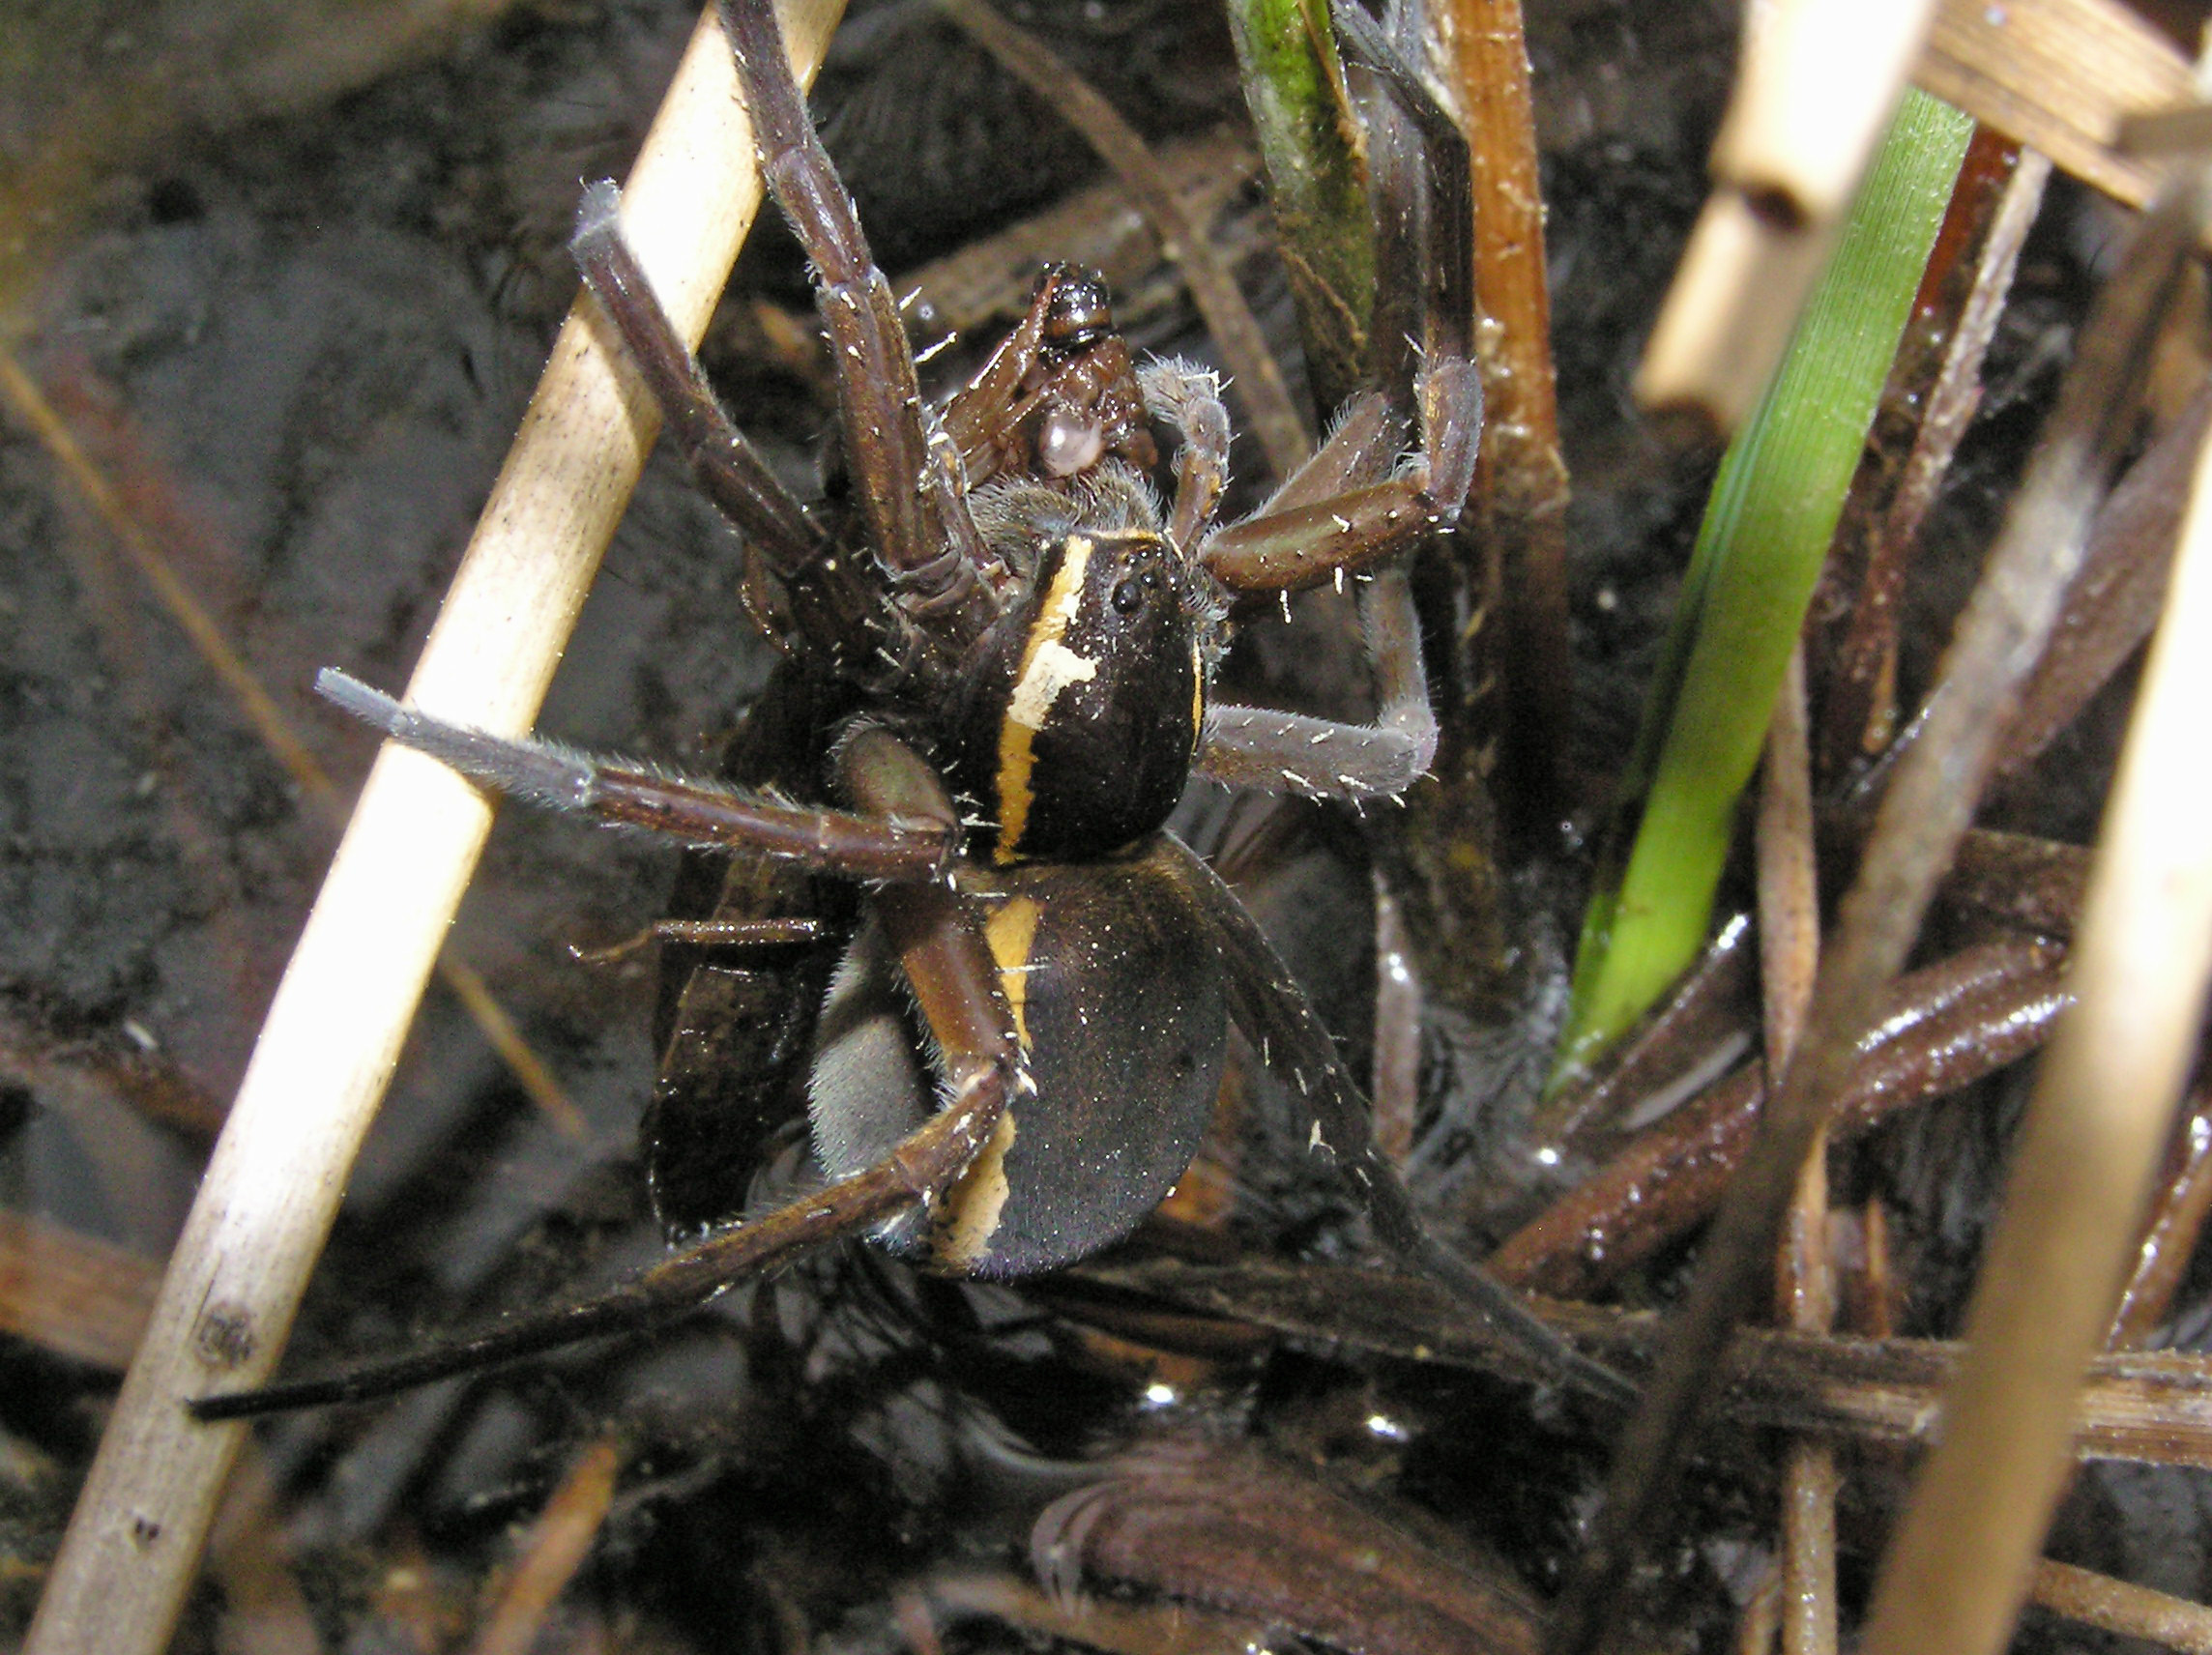 A gravid female D. plantarius with a large Aeshna dragonfly larva